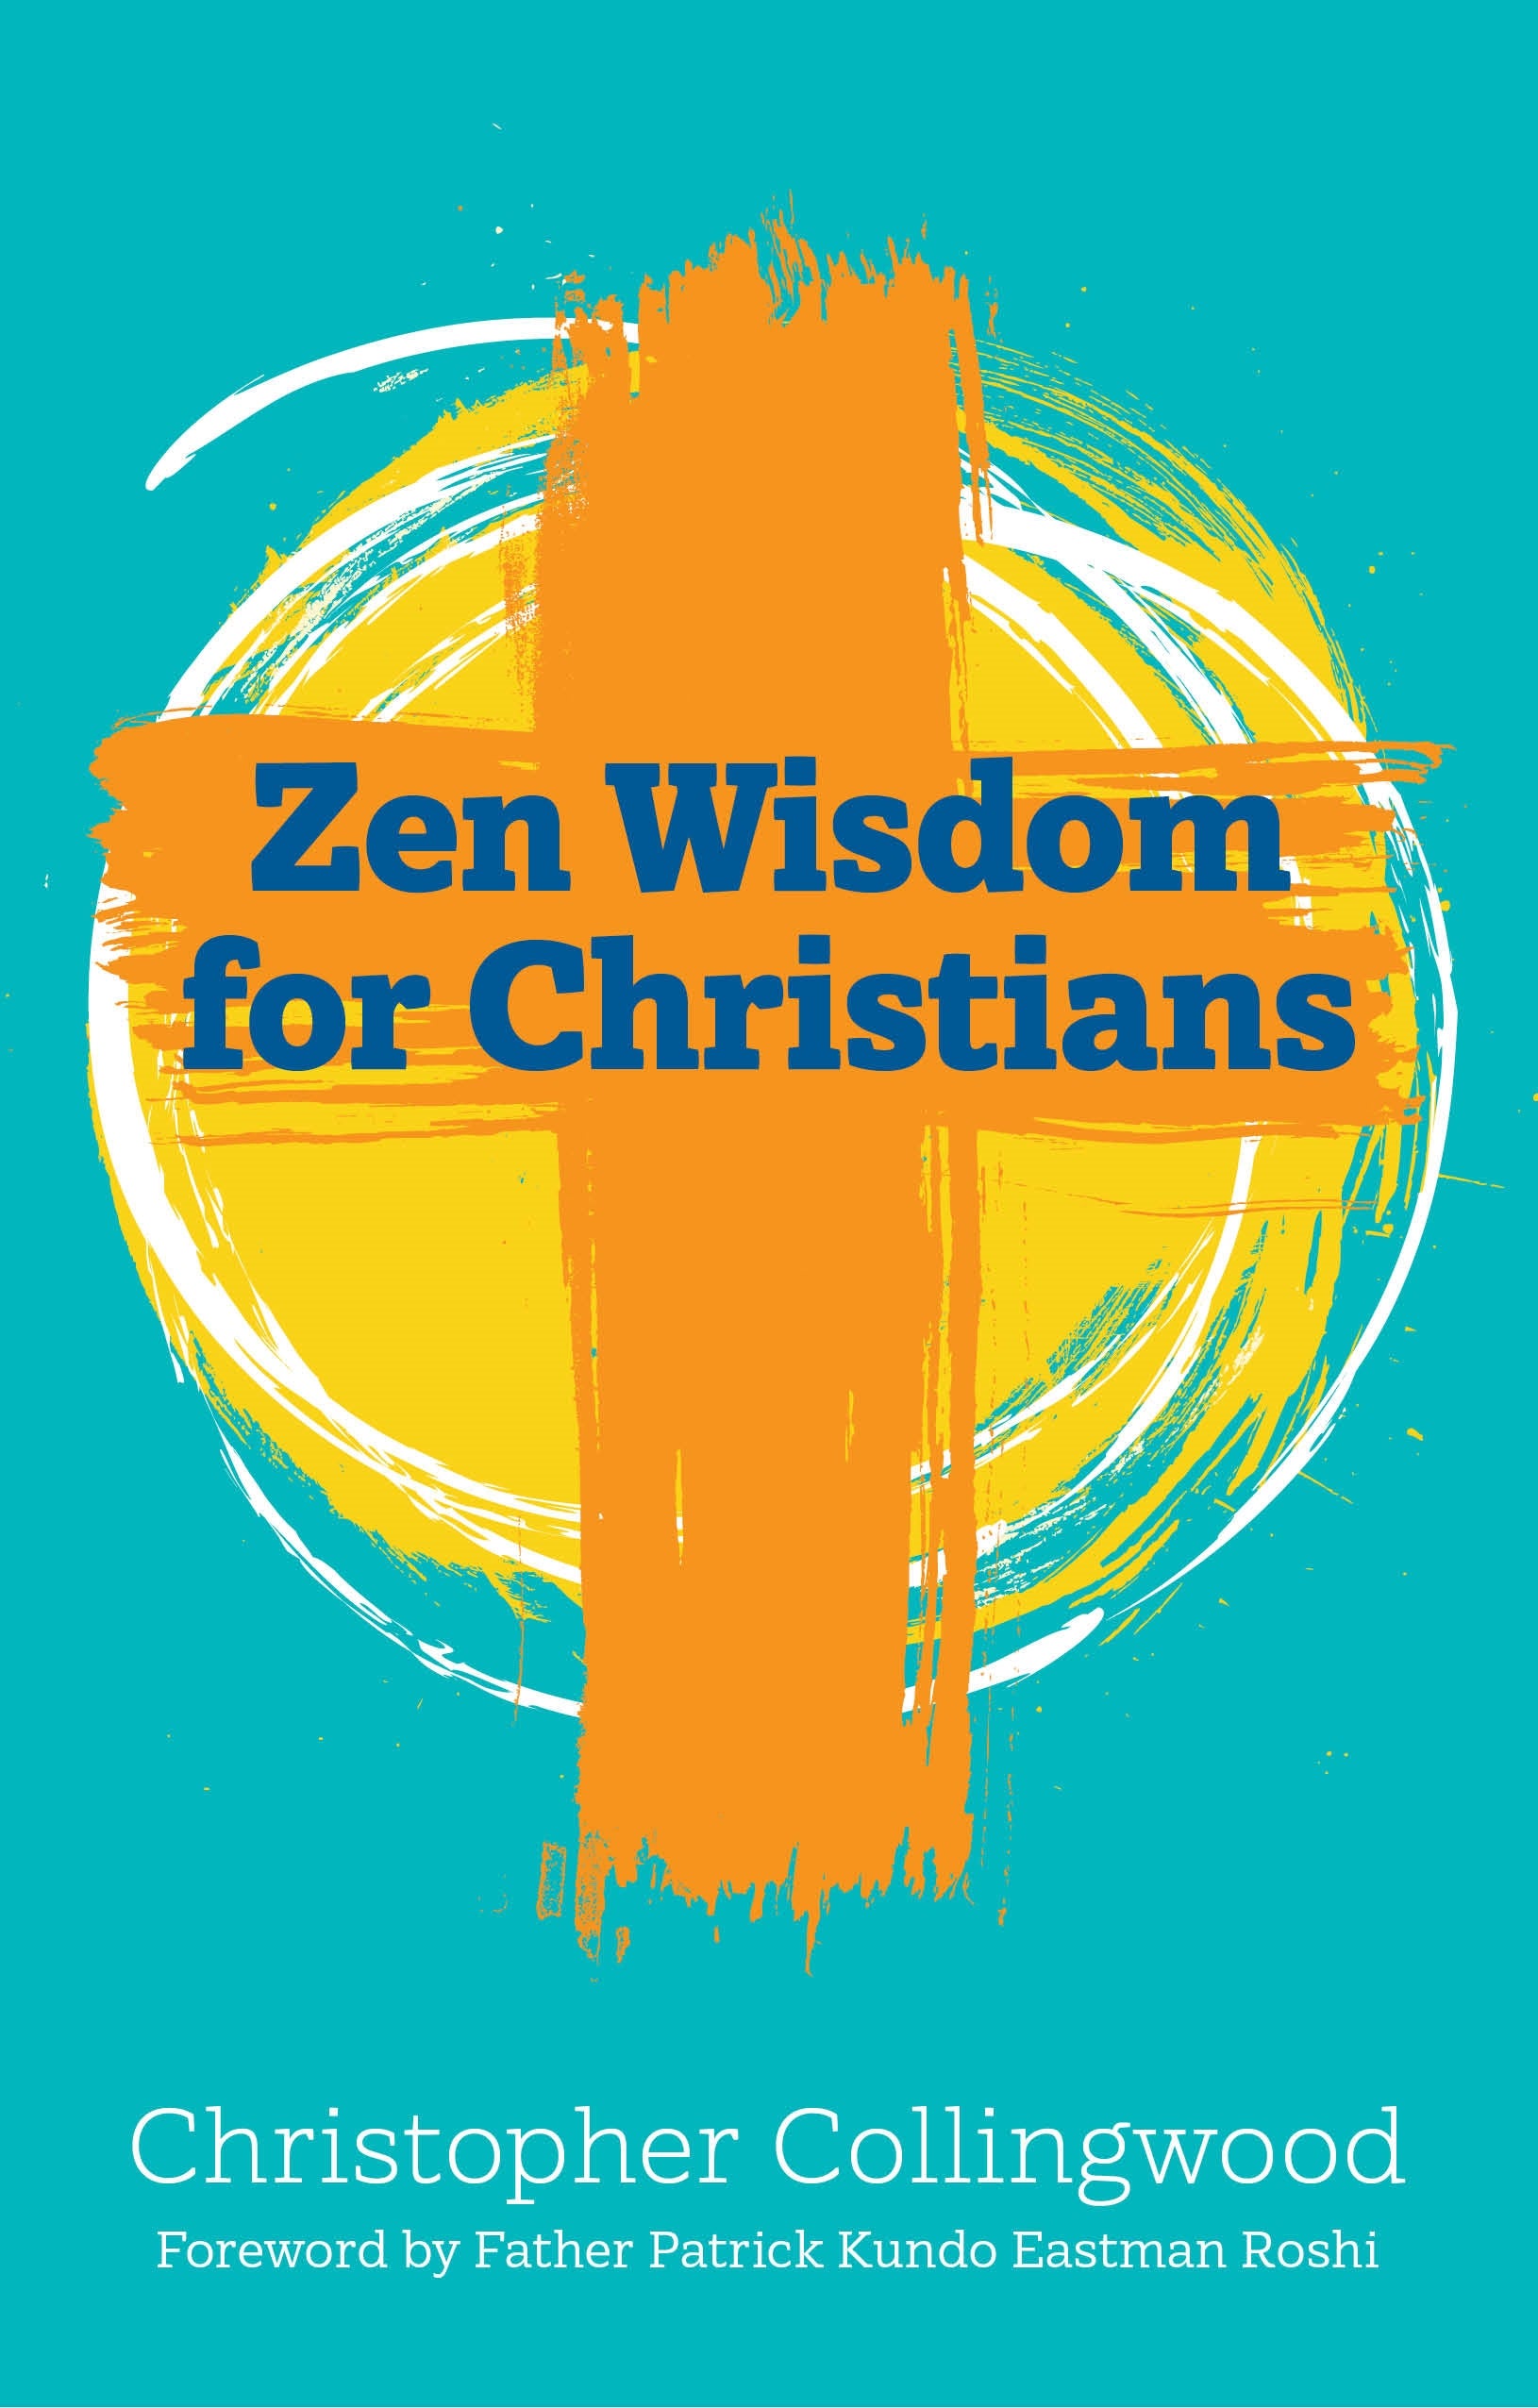 Zen Wisdom for Christians by Christopher Collingwood